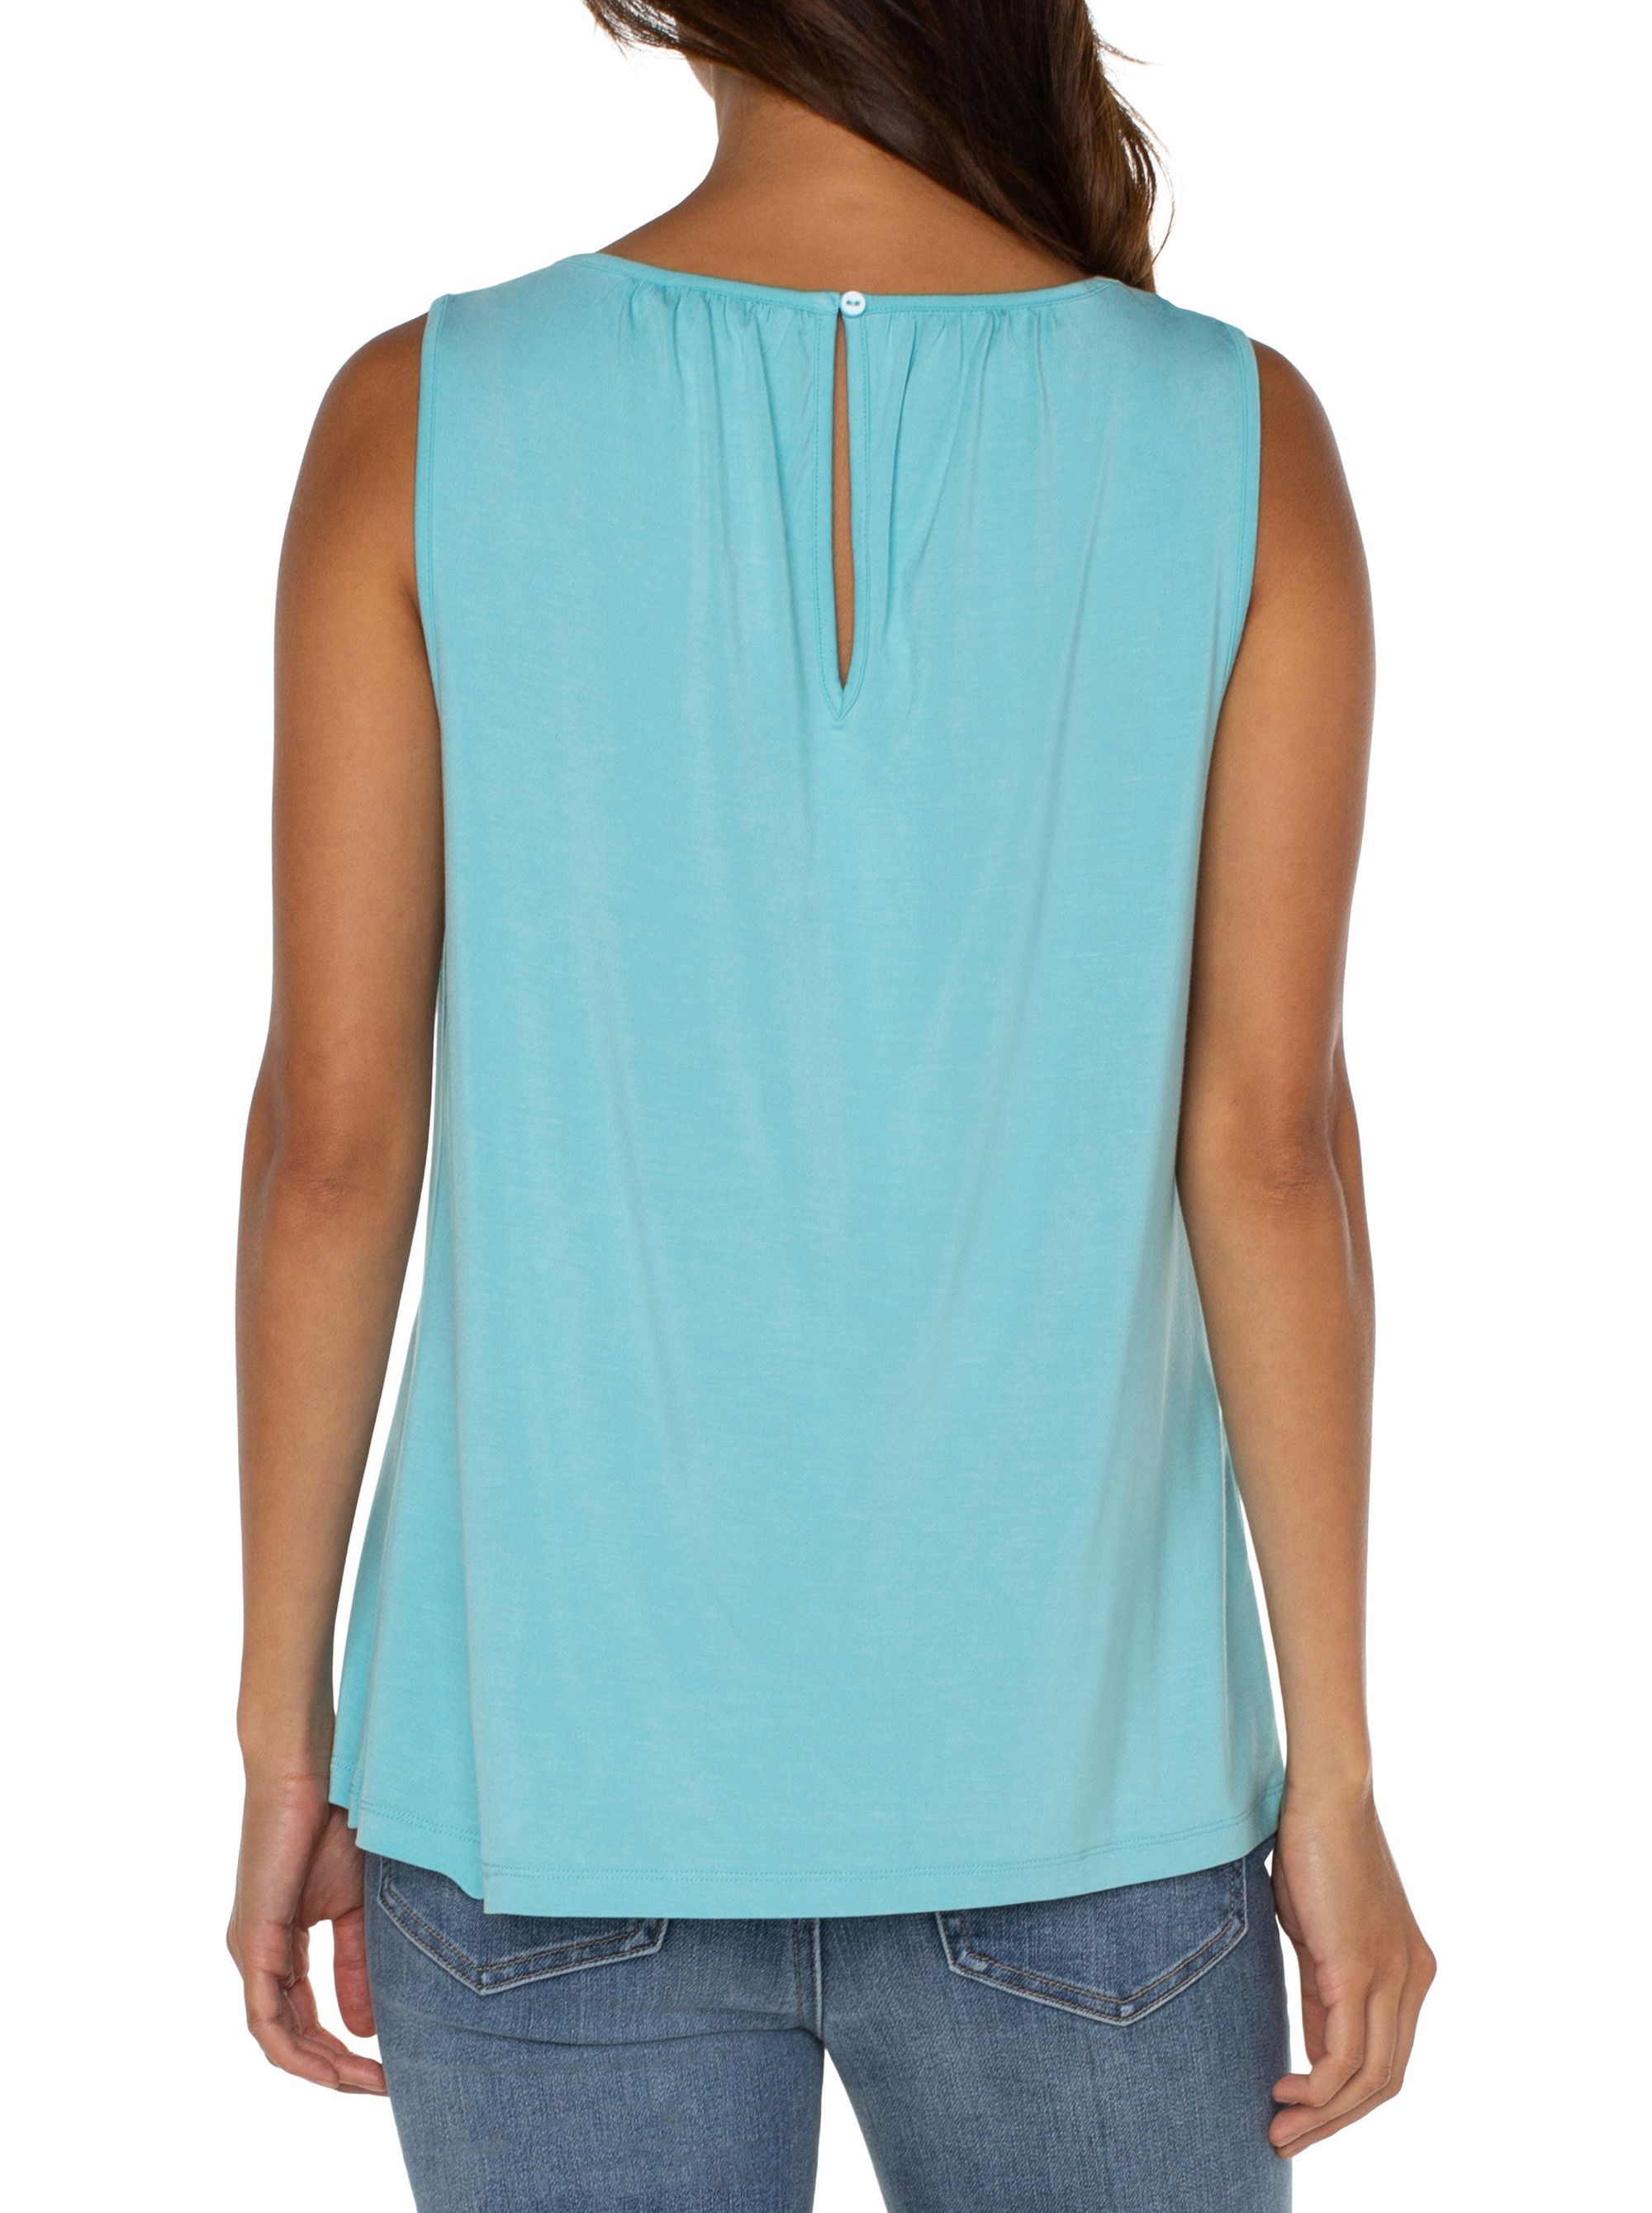 Liverpool Turquoise Sleeveless Knit Top w/keyhole